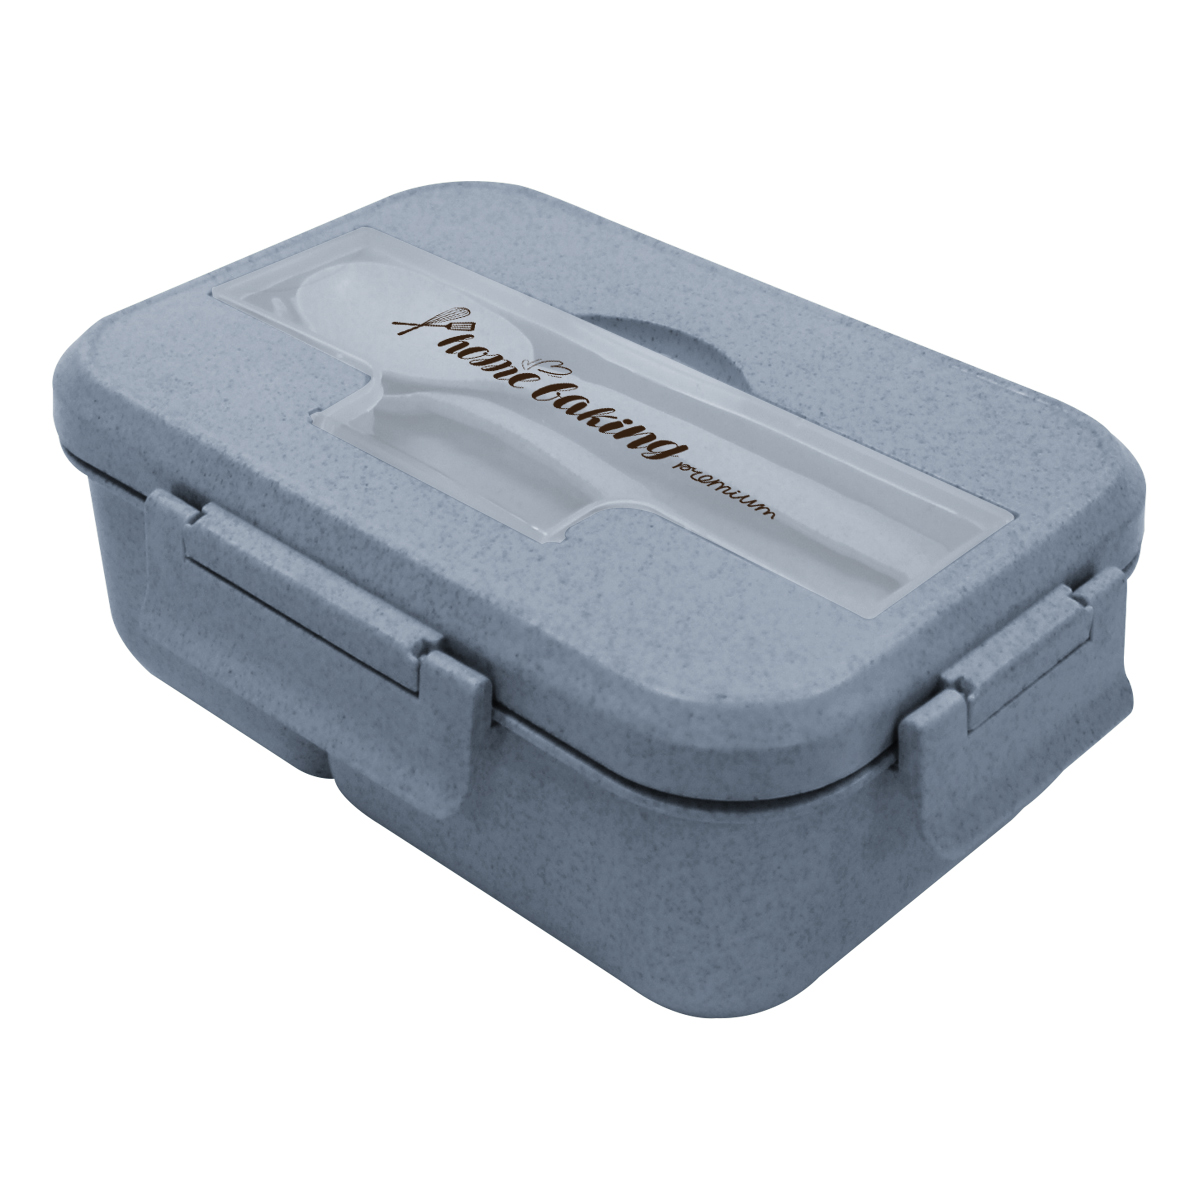 Multi-Compartment Food Container with Utensils - Promotional